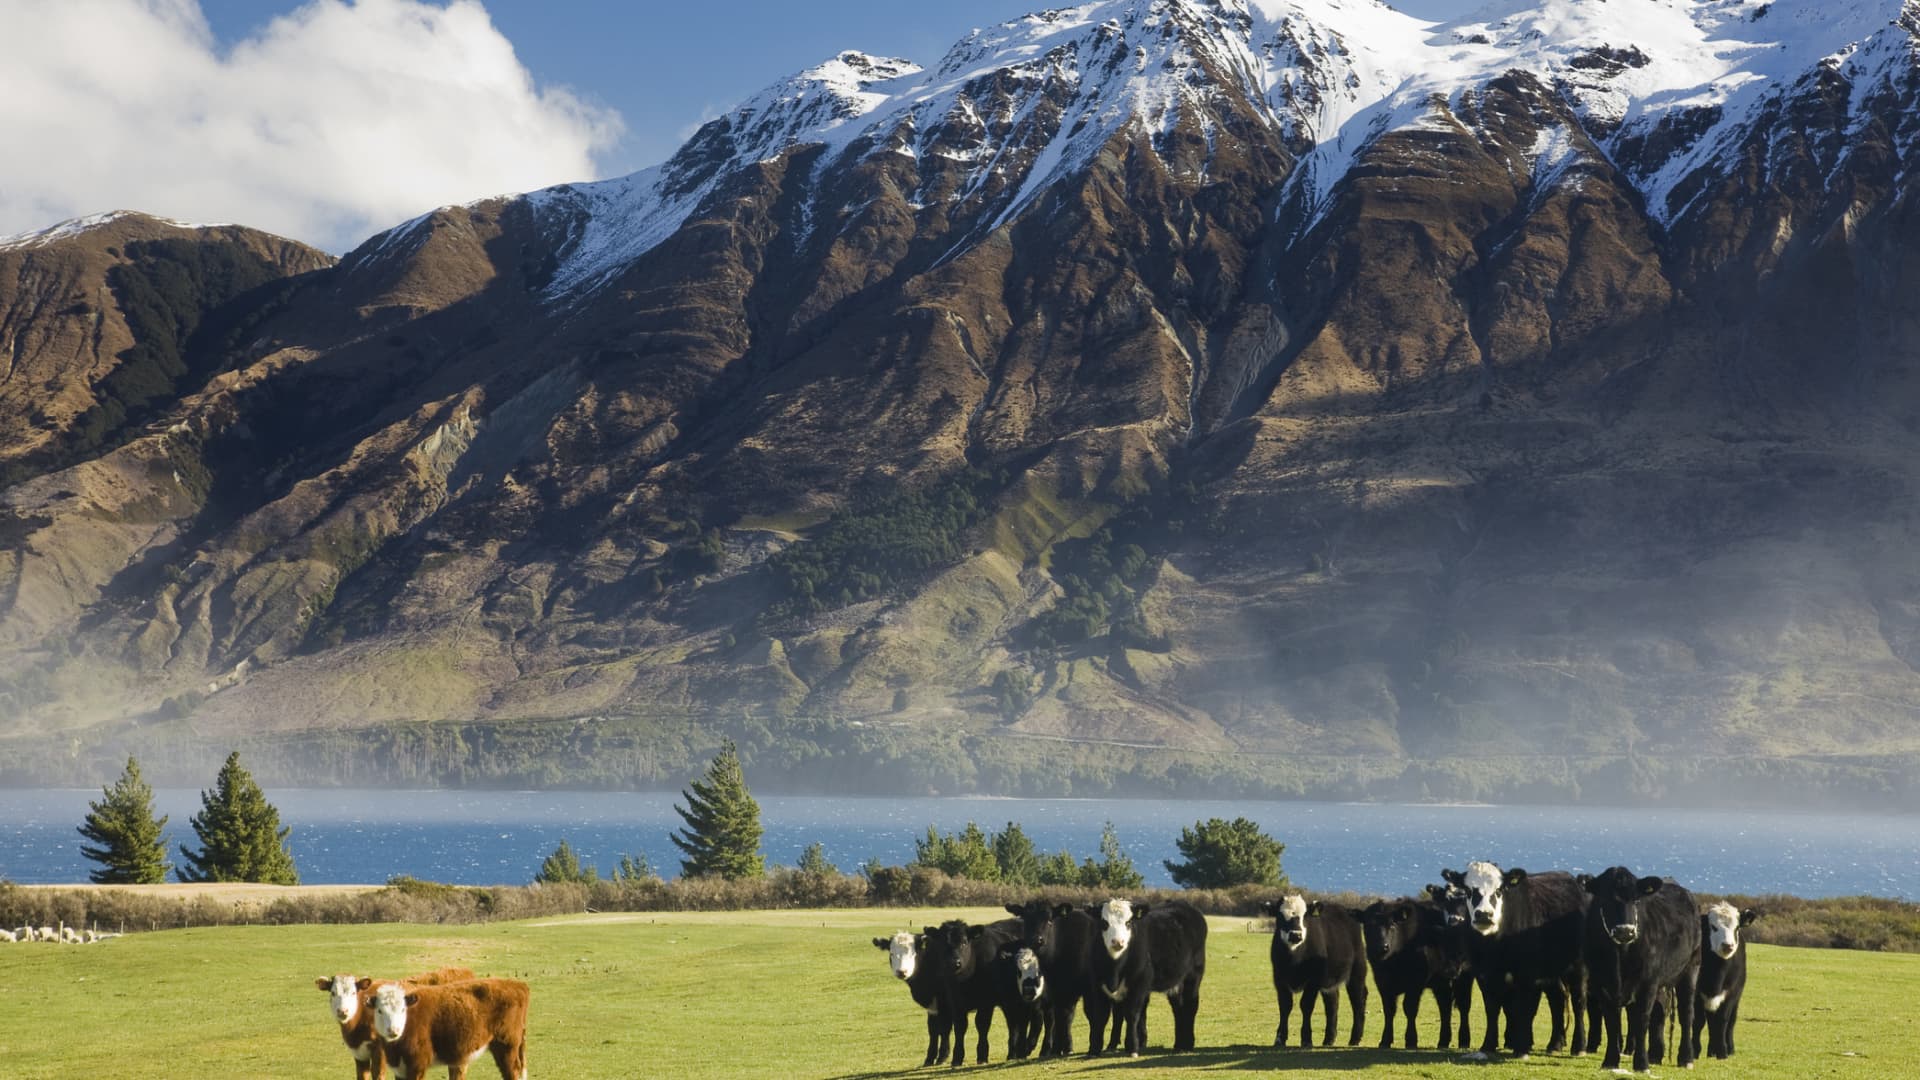 New Zealand plans to tax emissions from livestock burps and dung